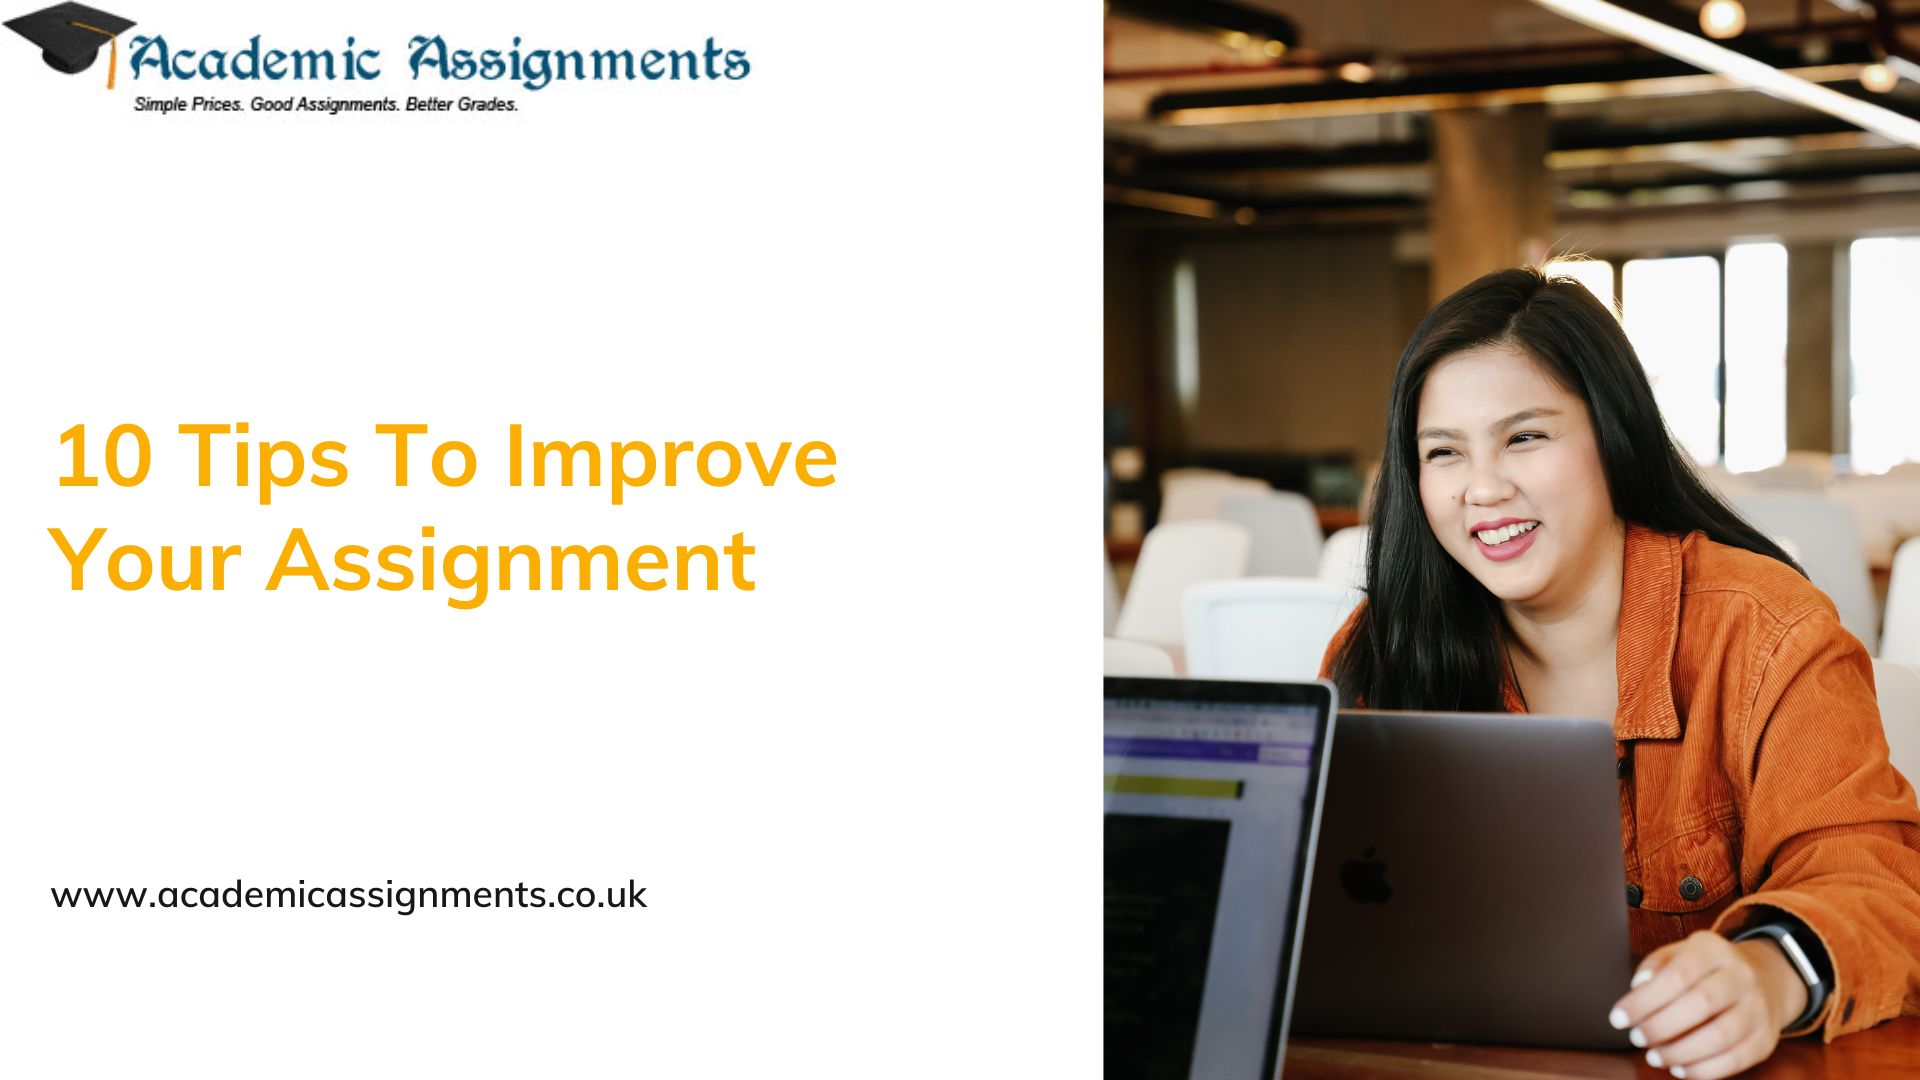 10 Tips To Improve Your Assignment